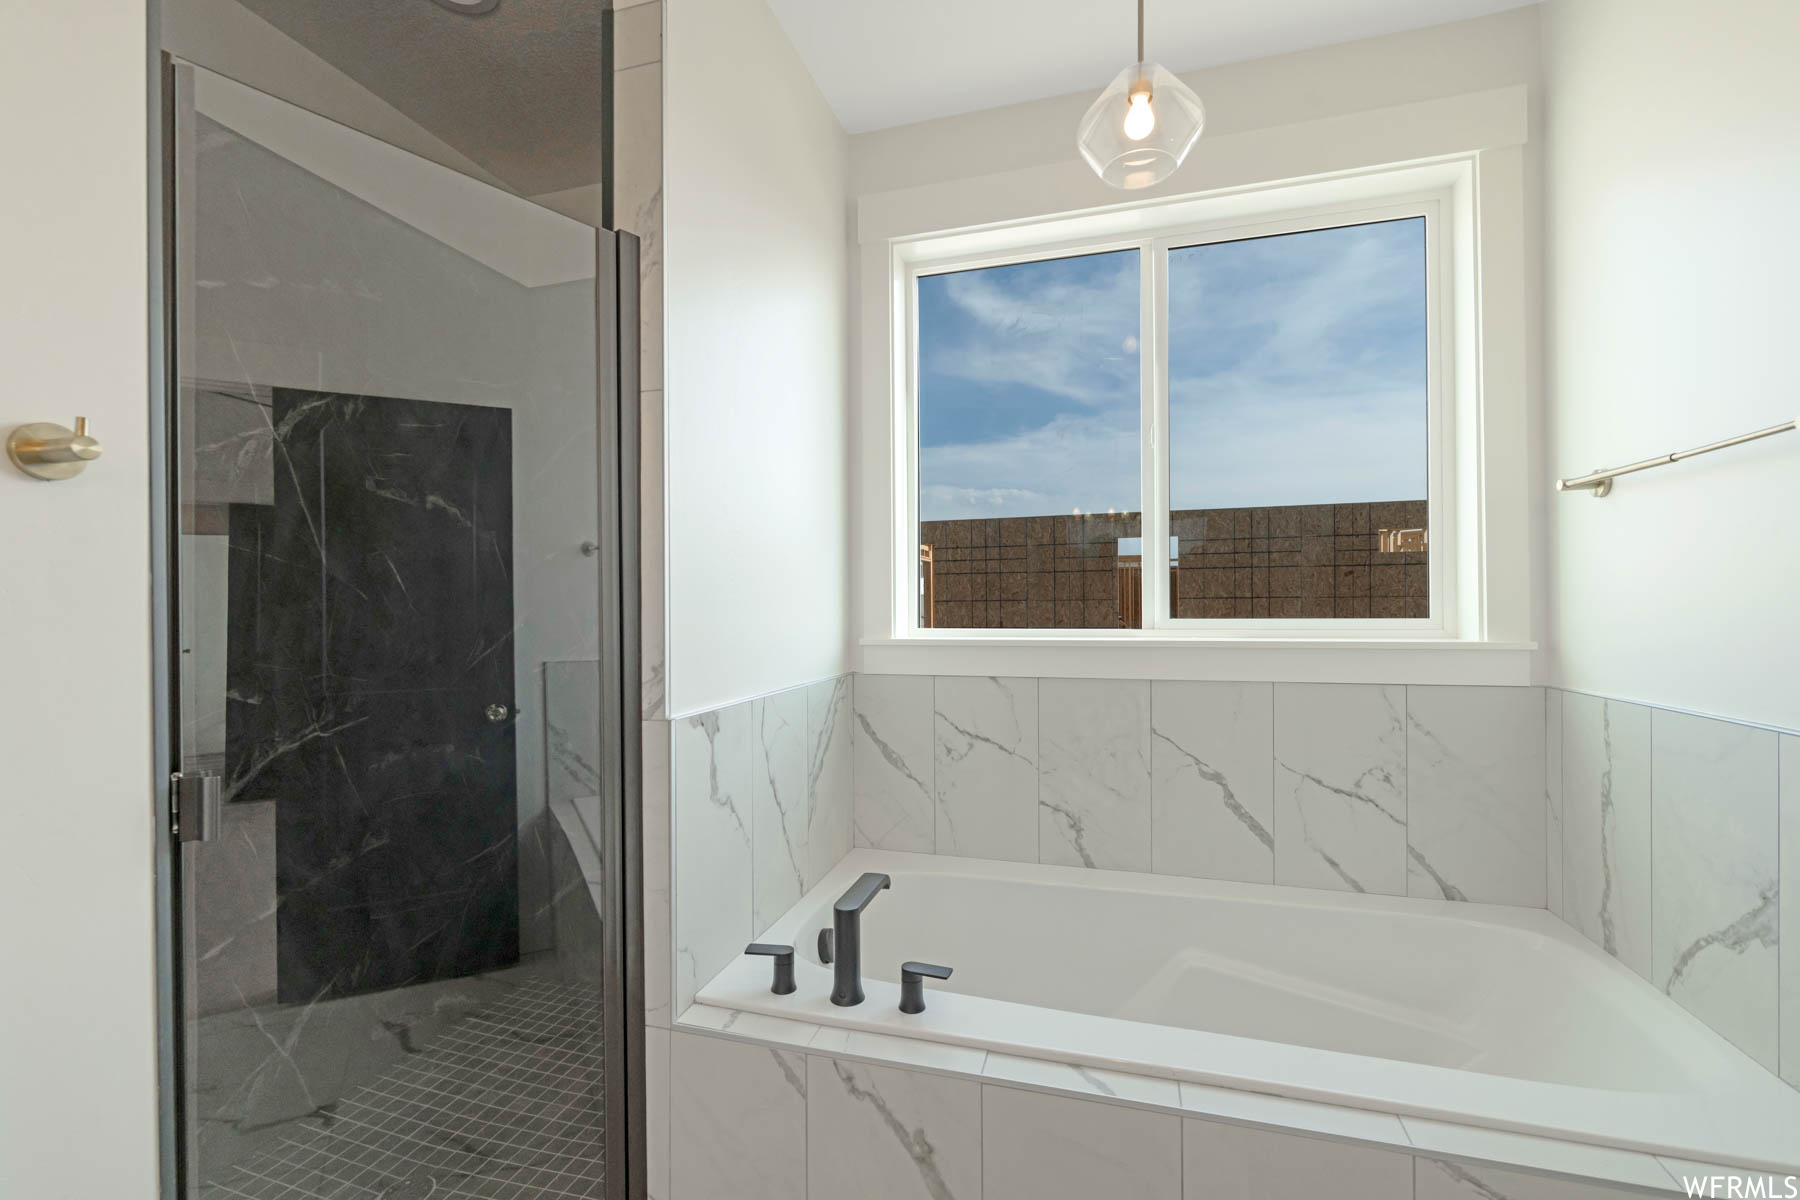 Bathroom with separate shower and tub enclosures